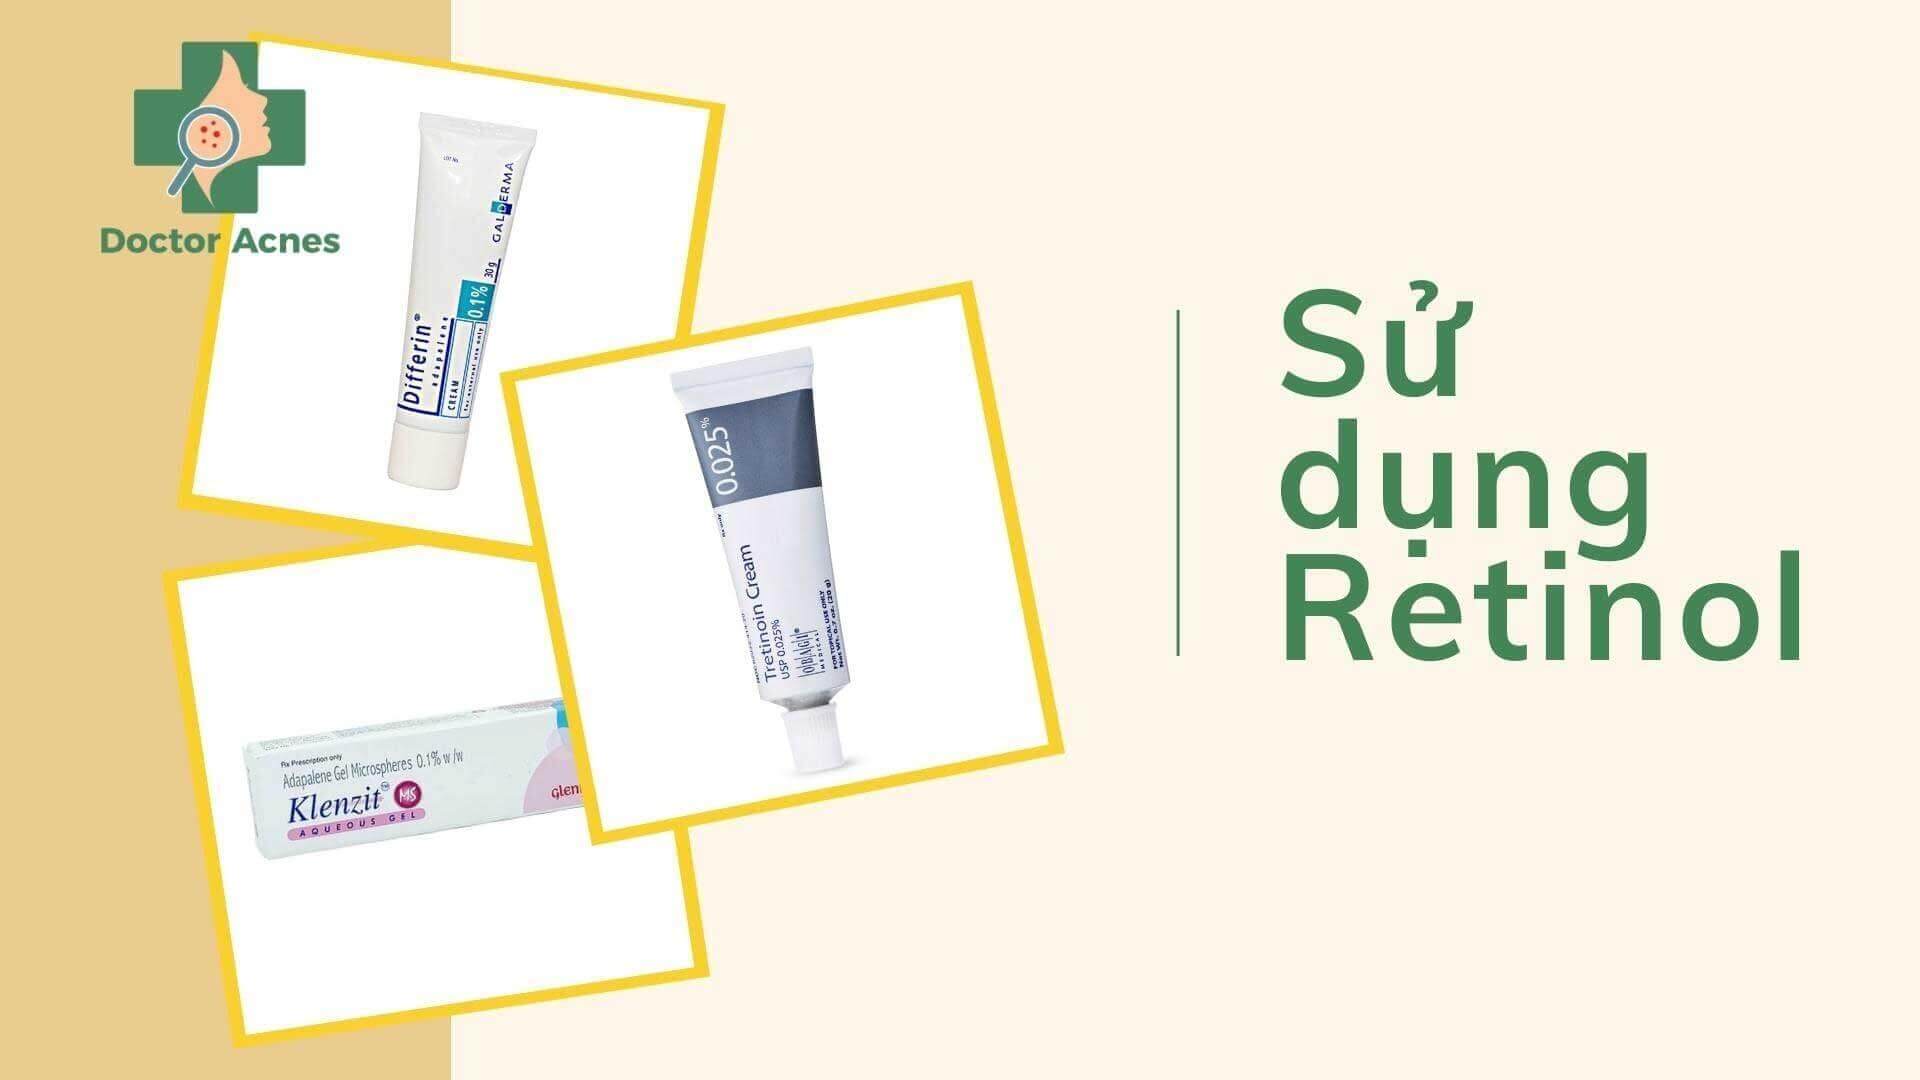 Sử dụng Retinoid - Doctor Acnes